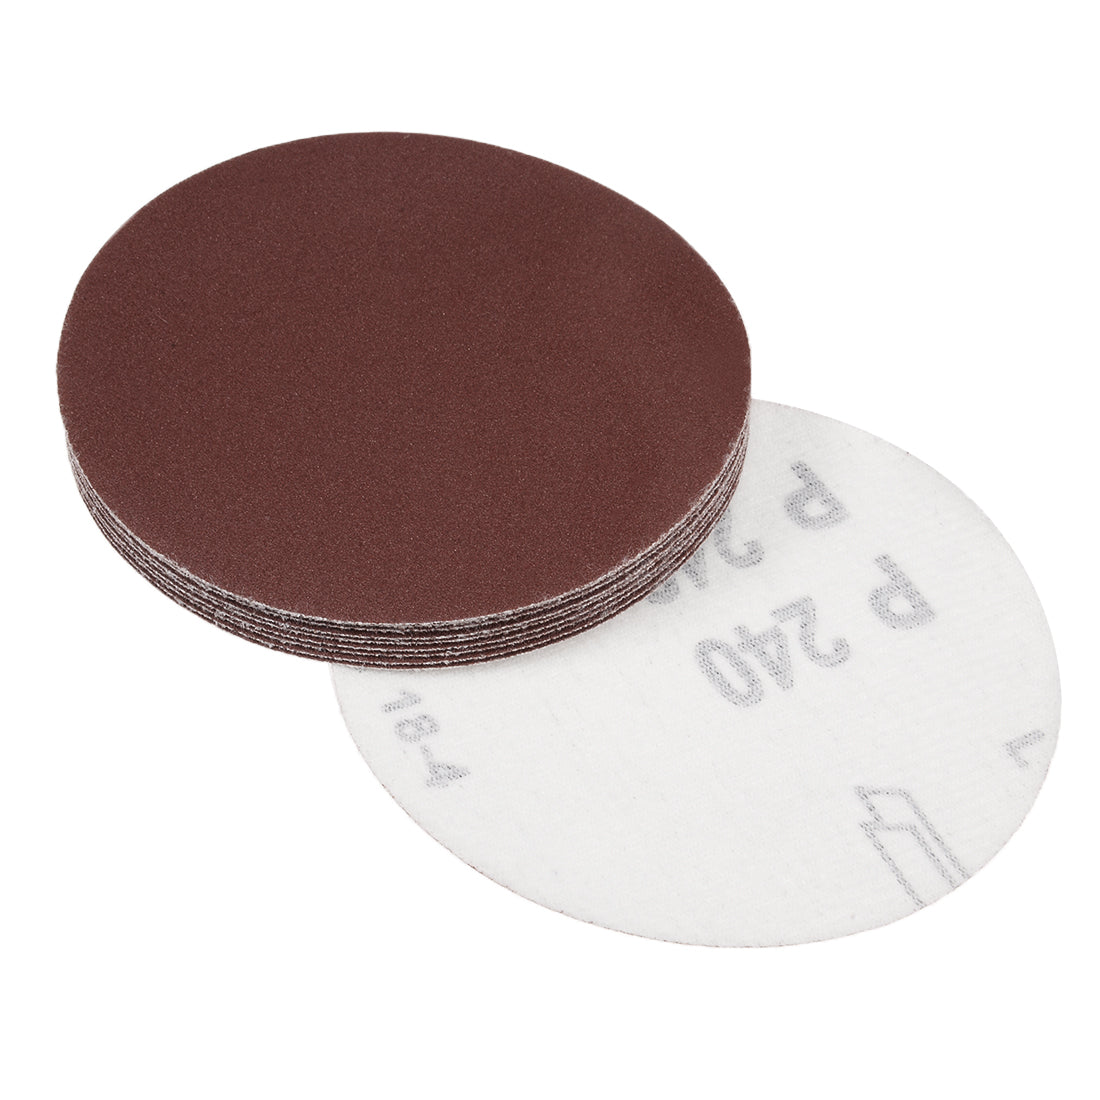 Uxcell Uxcell 4-Inch Sanding Disc 40 Grits Aluminum Oxide Flocking Back Sandpapers for Sanders 50 Pcs